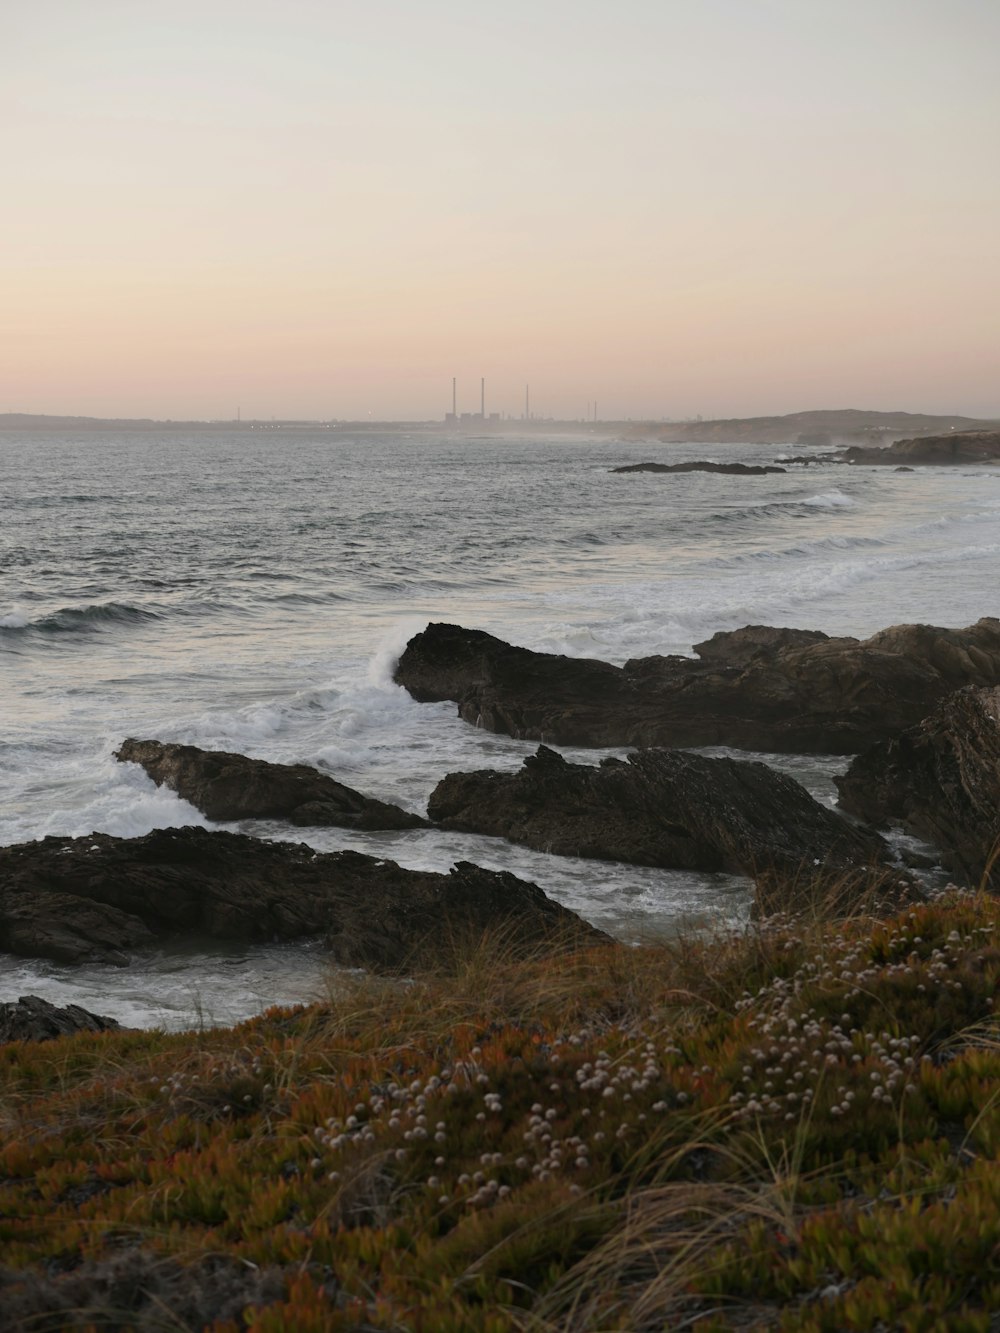 a view of the ocean from a rocky shore